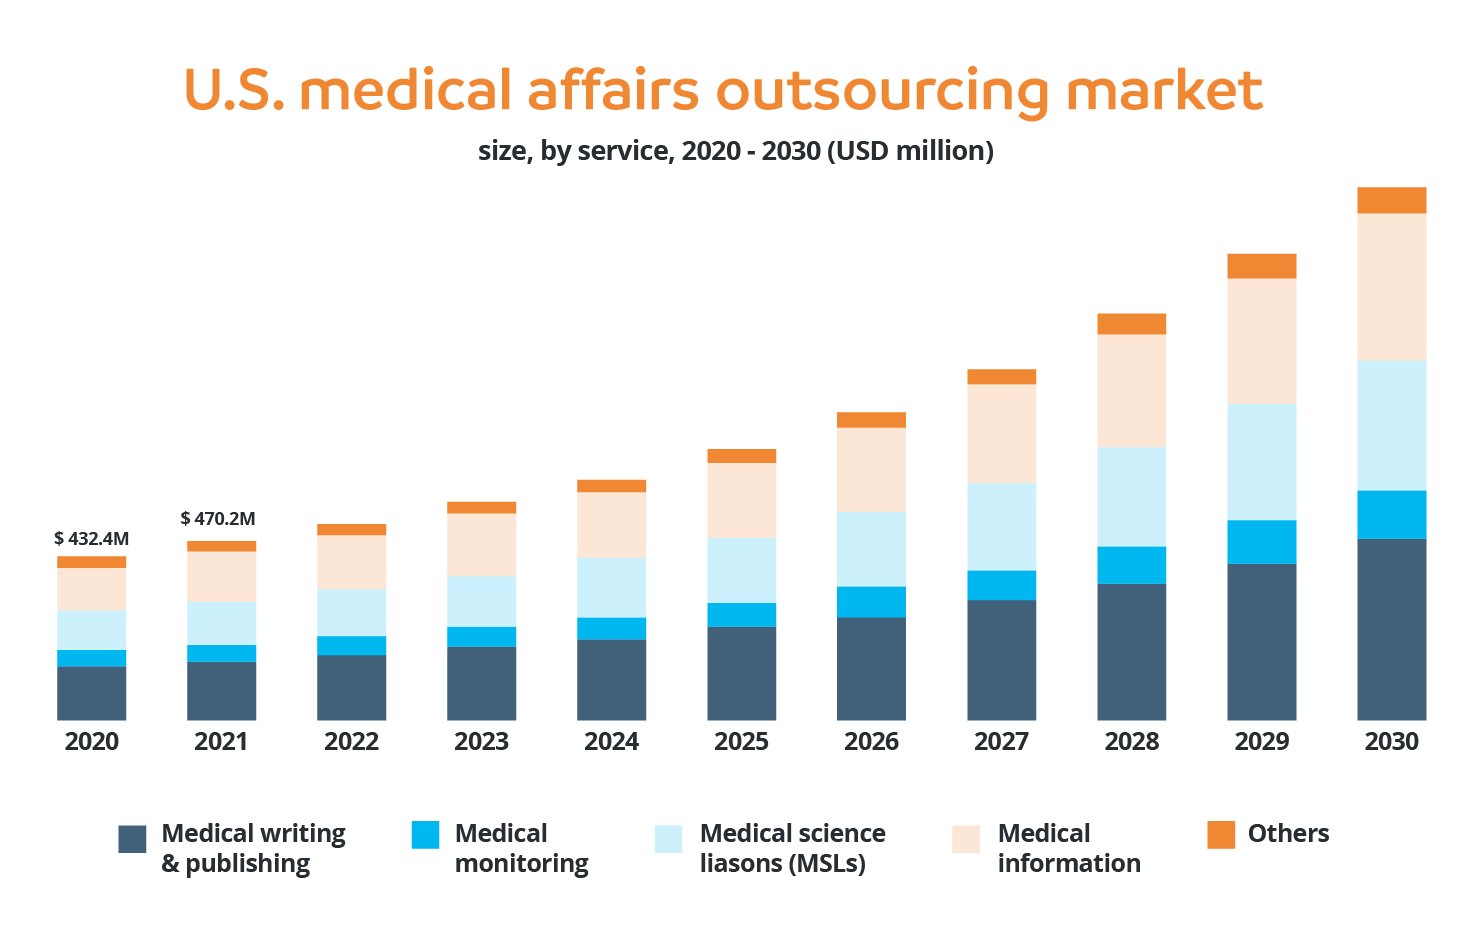 U.S medical affairs outsourcing market